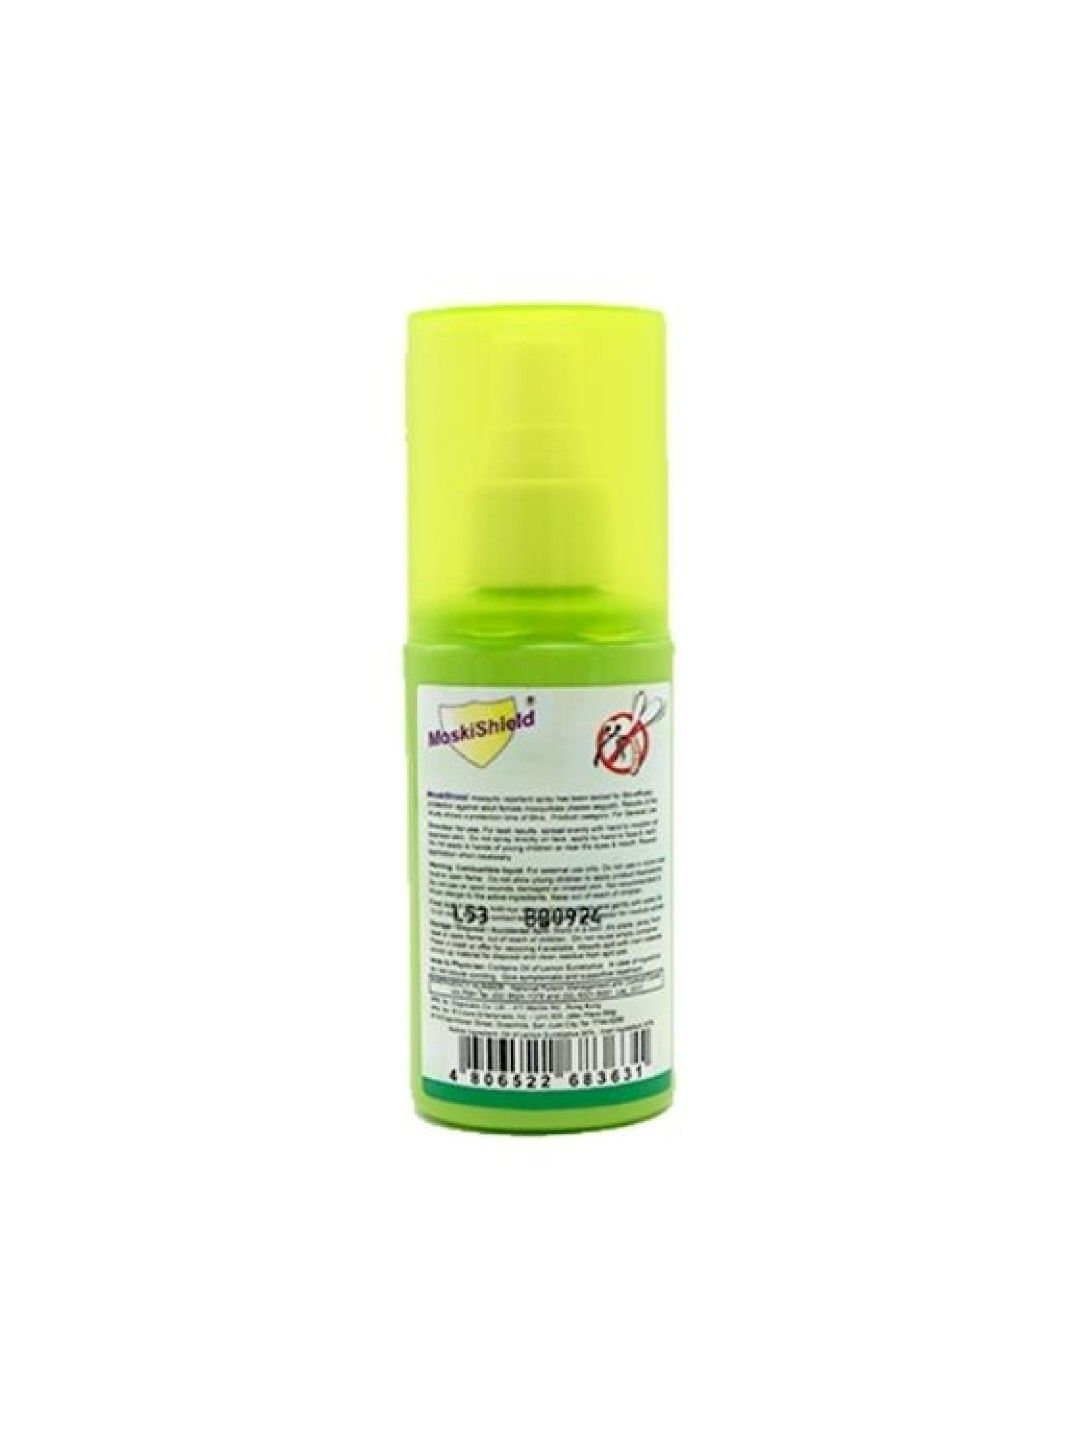 Moskishield Mosquito Repellent Spray Set of 3 (60 mL) (No Color- Image 2)